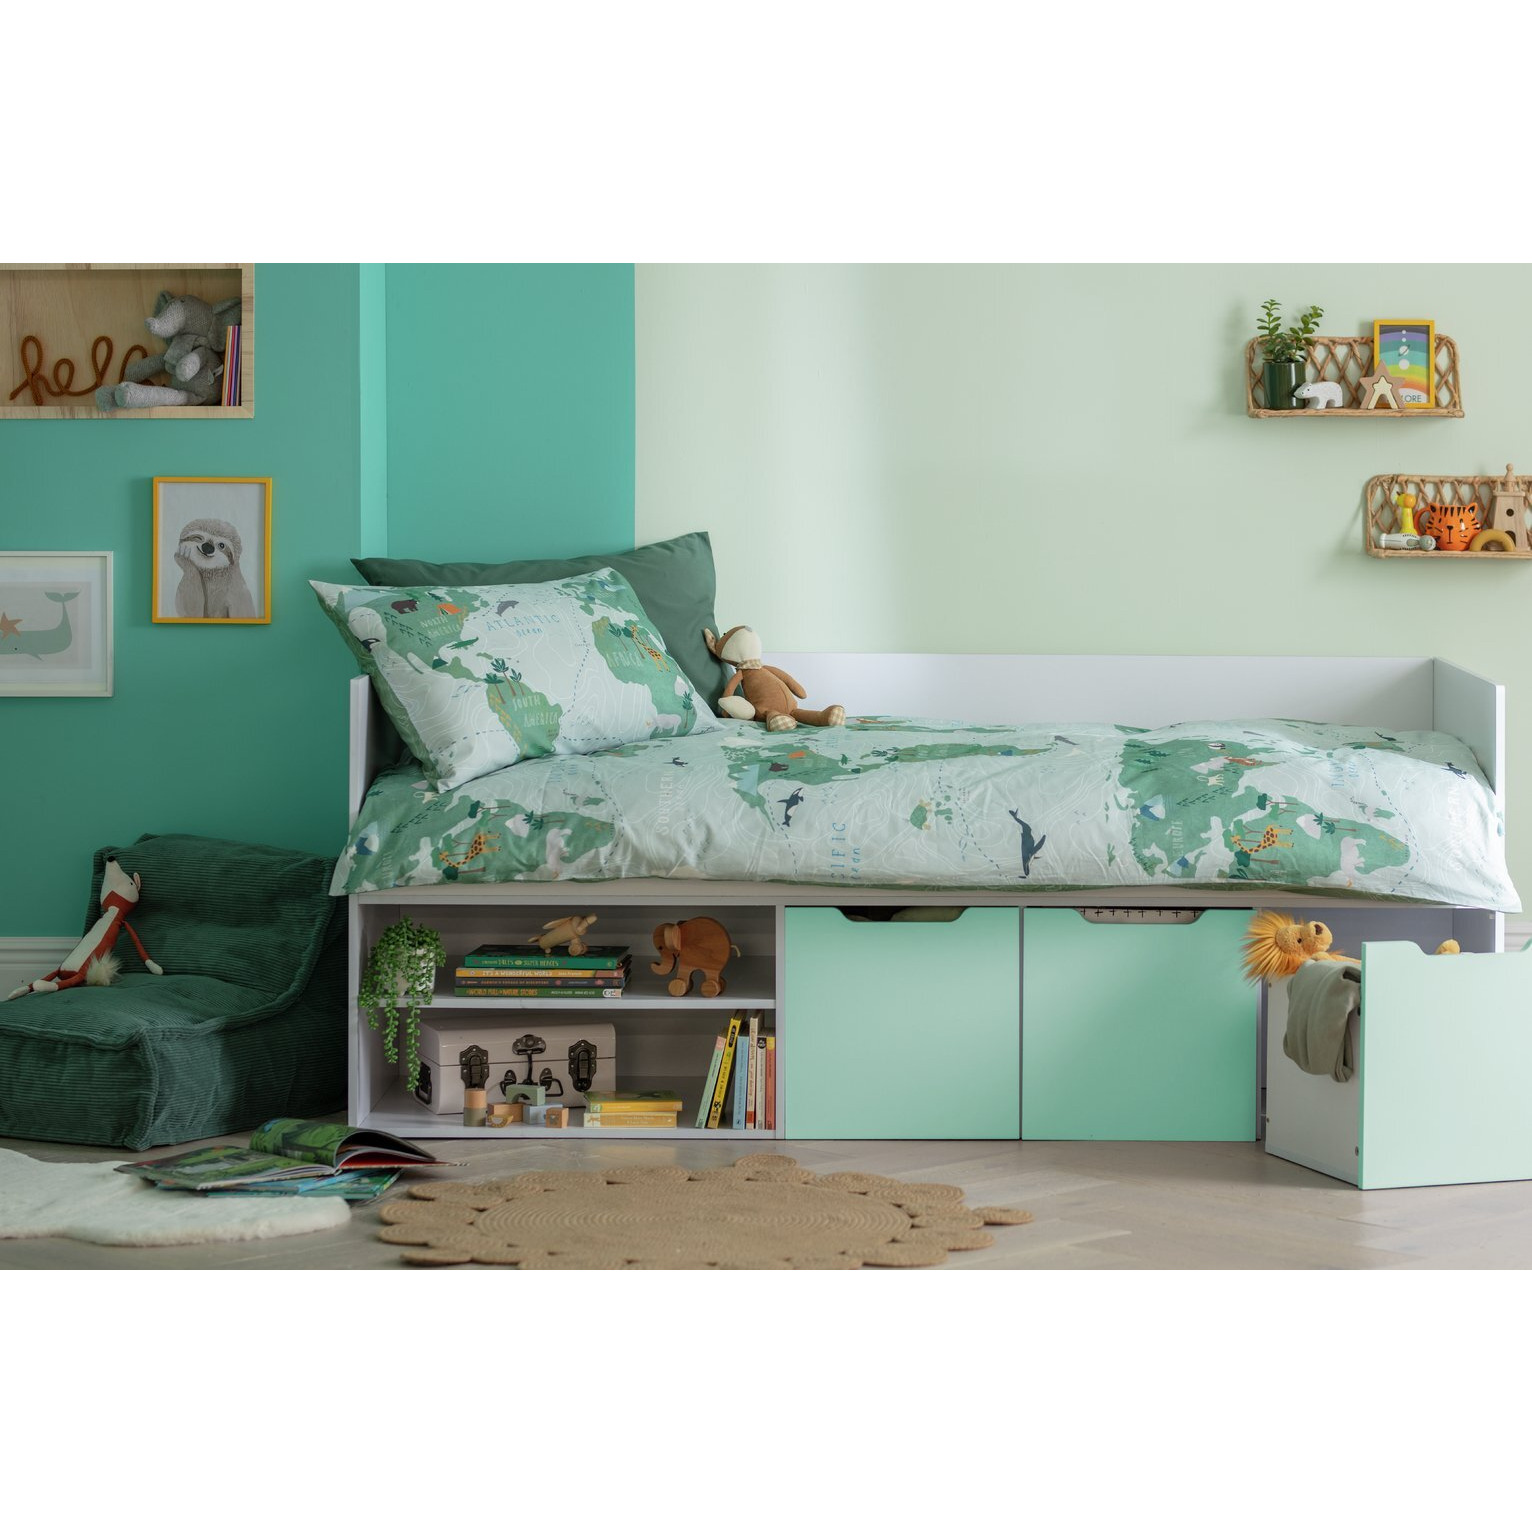 Habitat Jude Cabin Bed Frame With Mattress - White And Green - image 1